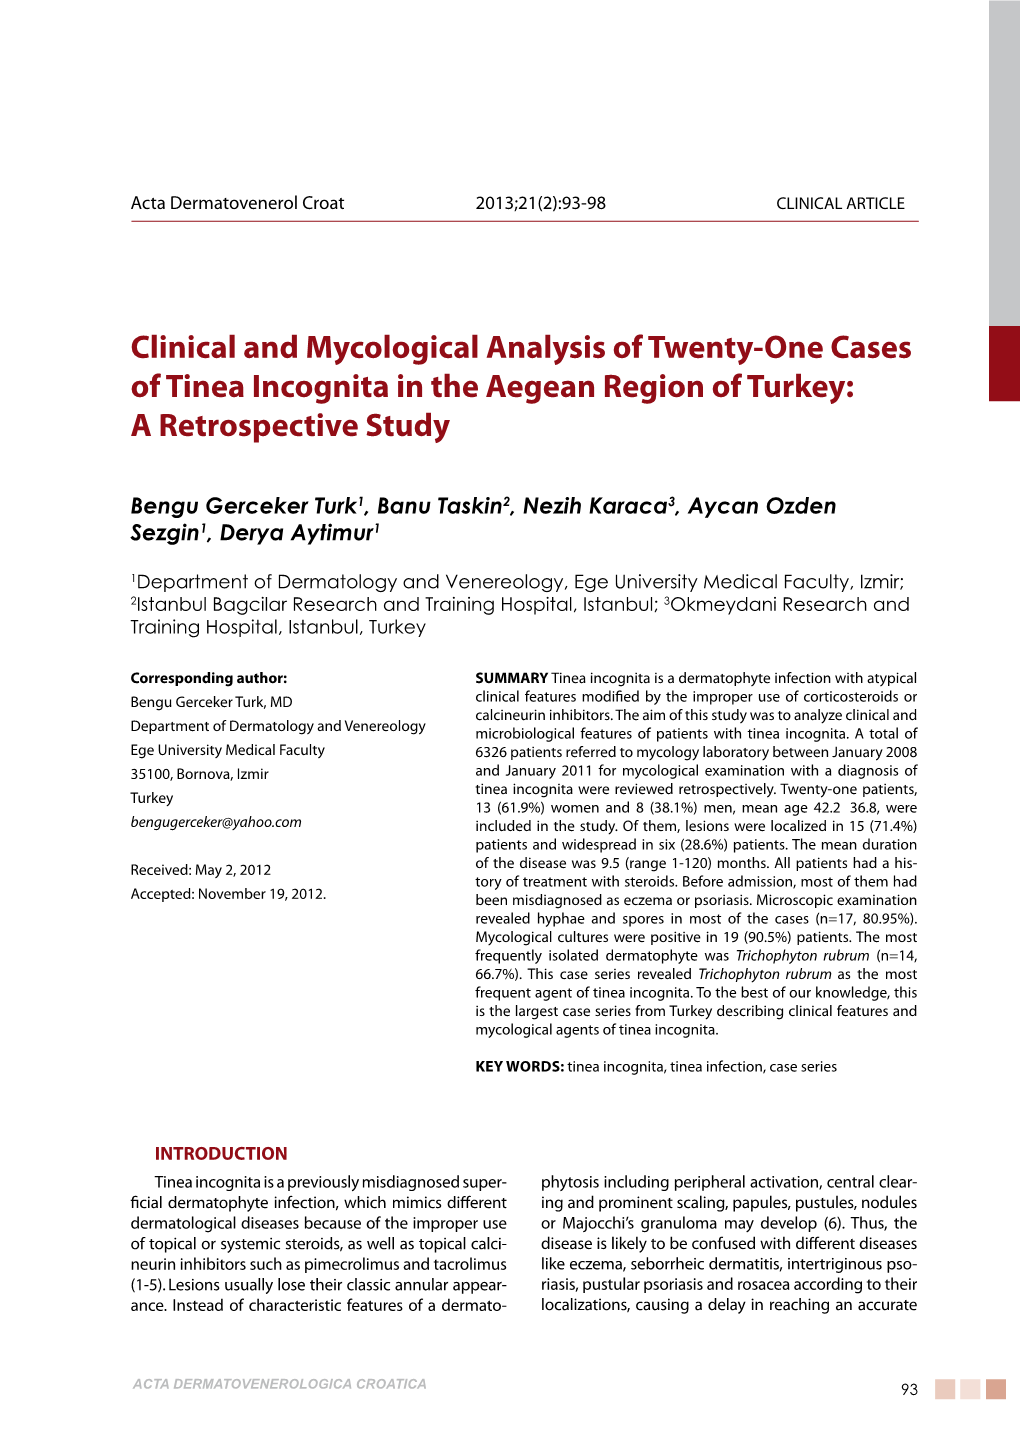 Clinical and Mycological Analysis of Twenty-One Cases of Tinea Incognita in the Aegean Region of Turkey: a Retrospective Study